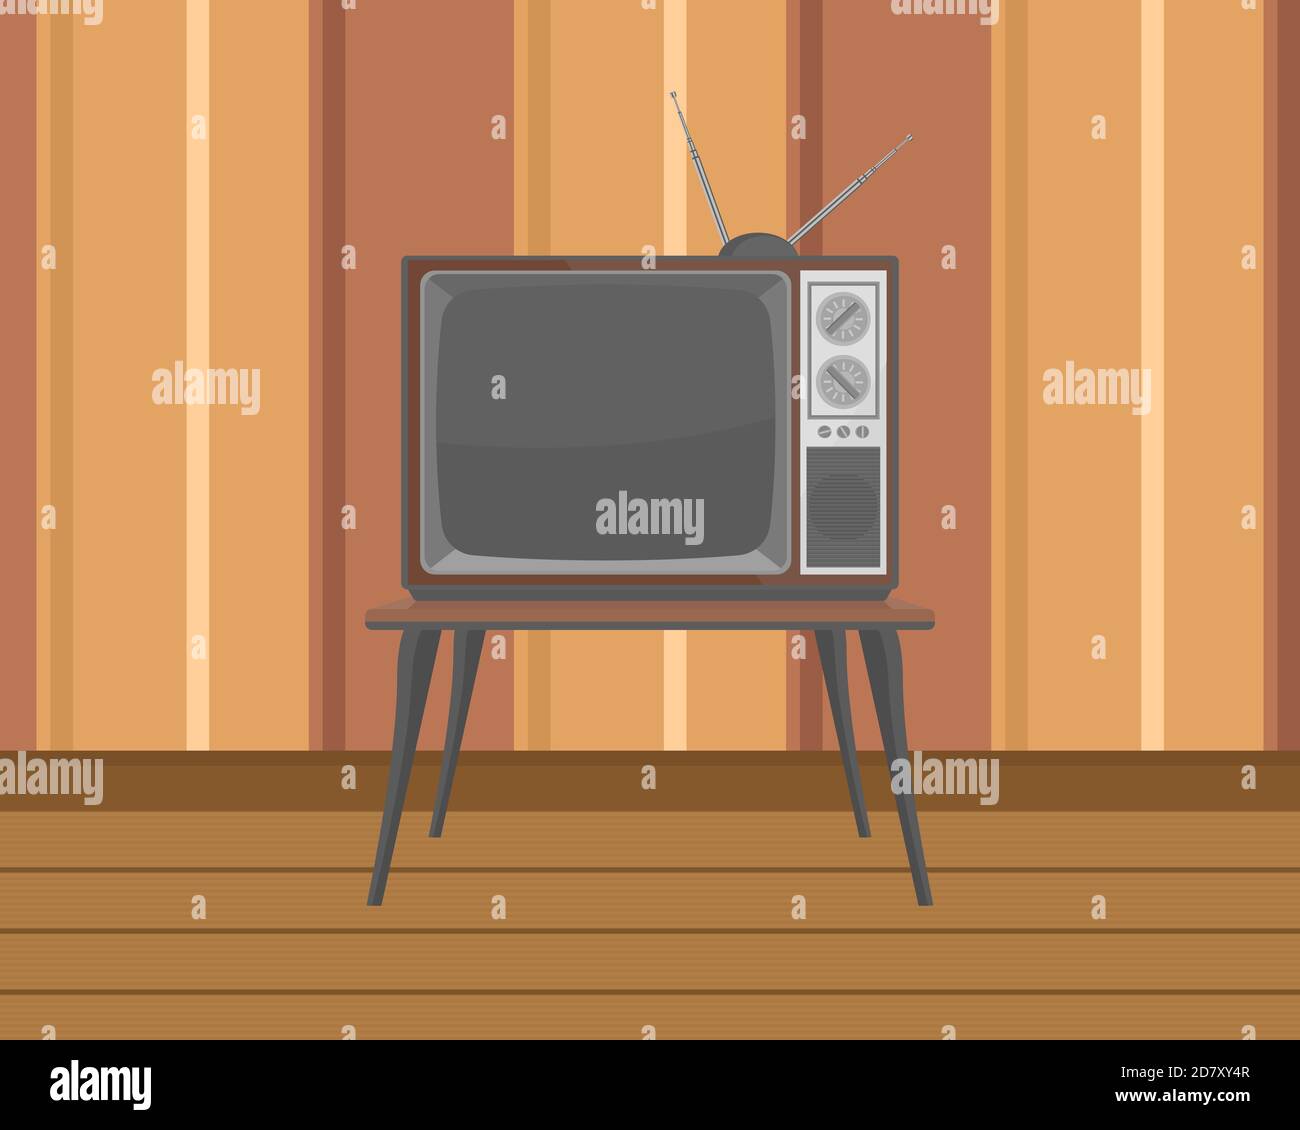 Old tv on table with flat design Stock Vector